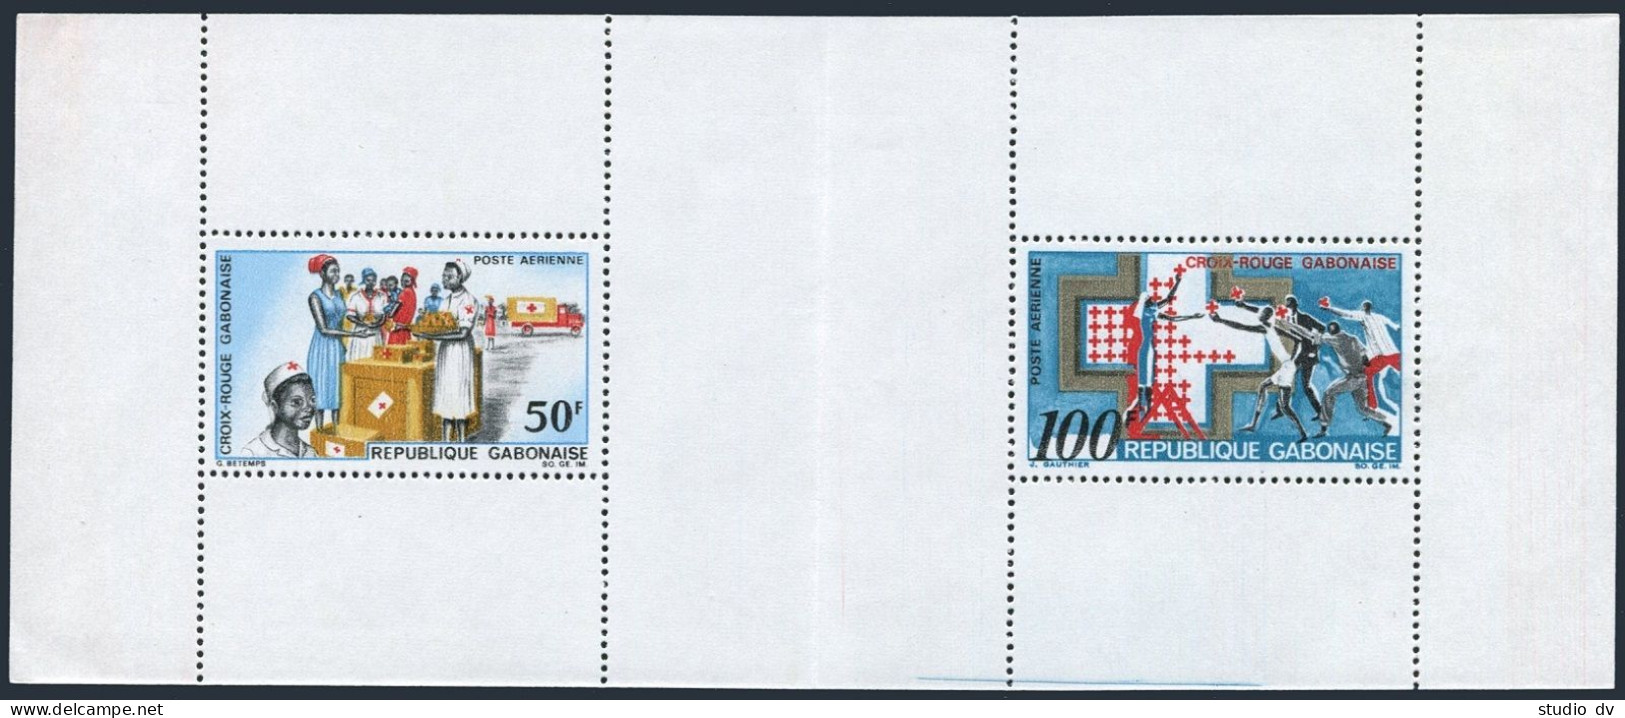 Gabon C68-C69a Booklet,MNH Michel 306-307 MH. Support For Red Cross 1968. - Gabon (1960-...)